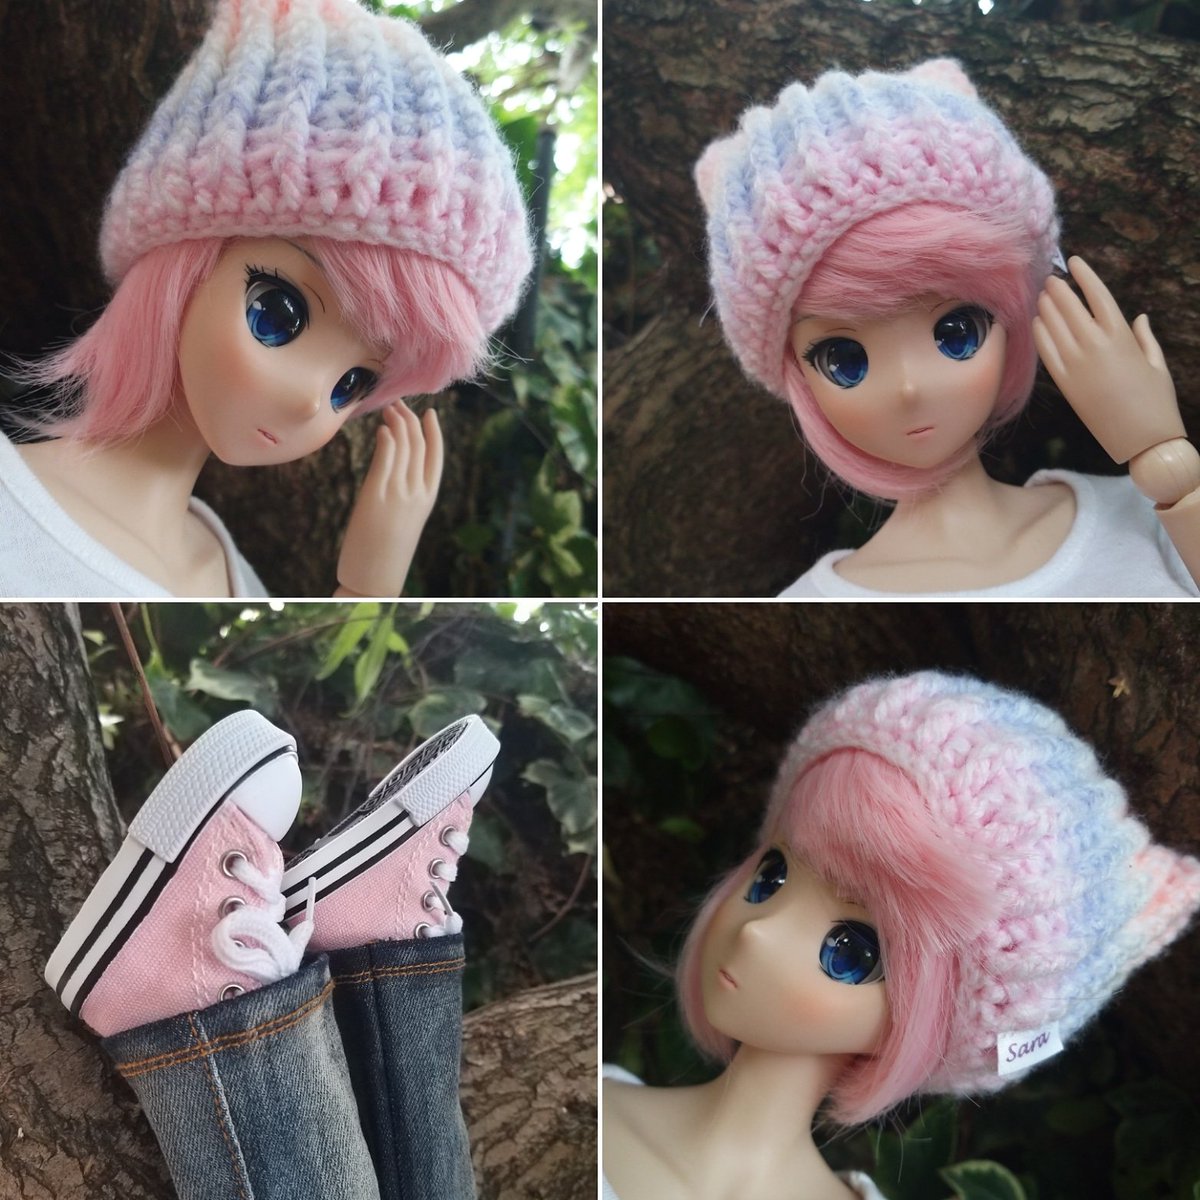 Pretty in pink Chitose 😊 #chitose #smartdoll #dannychoo #crochet #bysarascales #octopudding #cutedoll #crochetdollhat #pink #pinkwig #pinkshoes